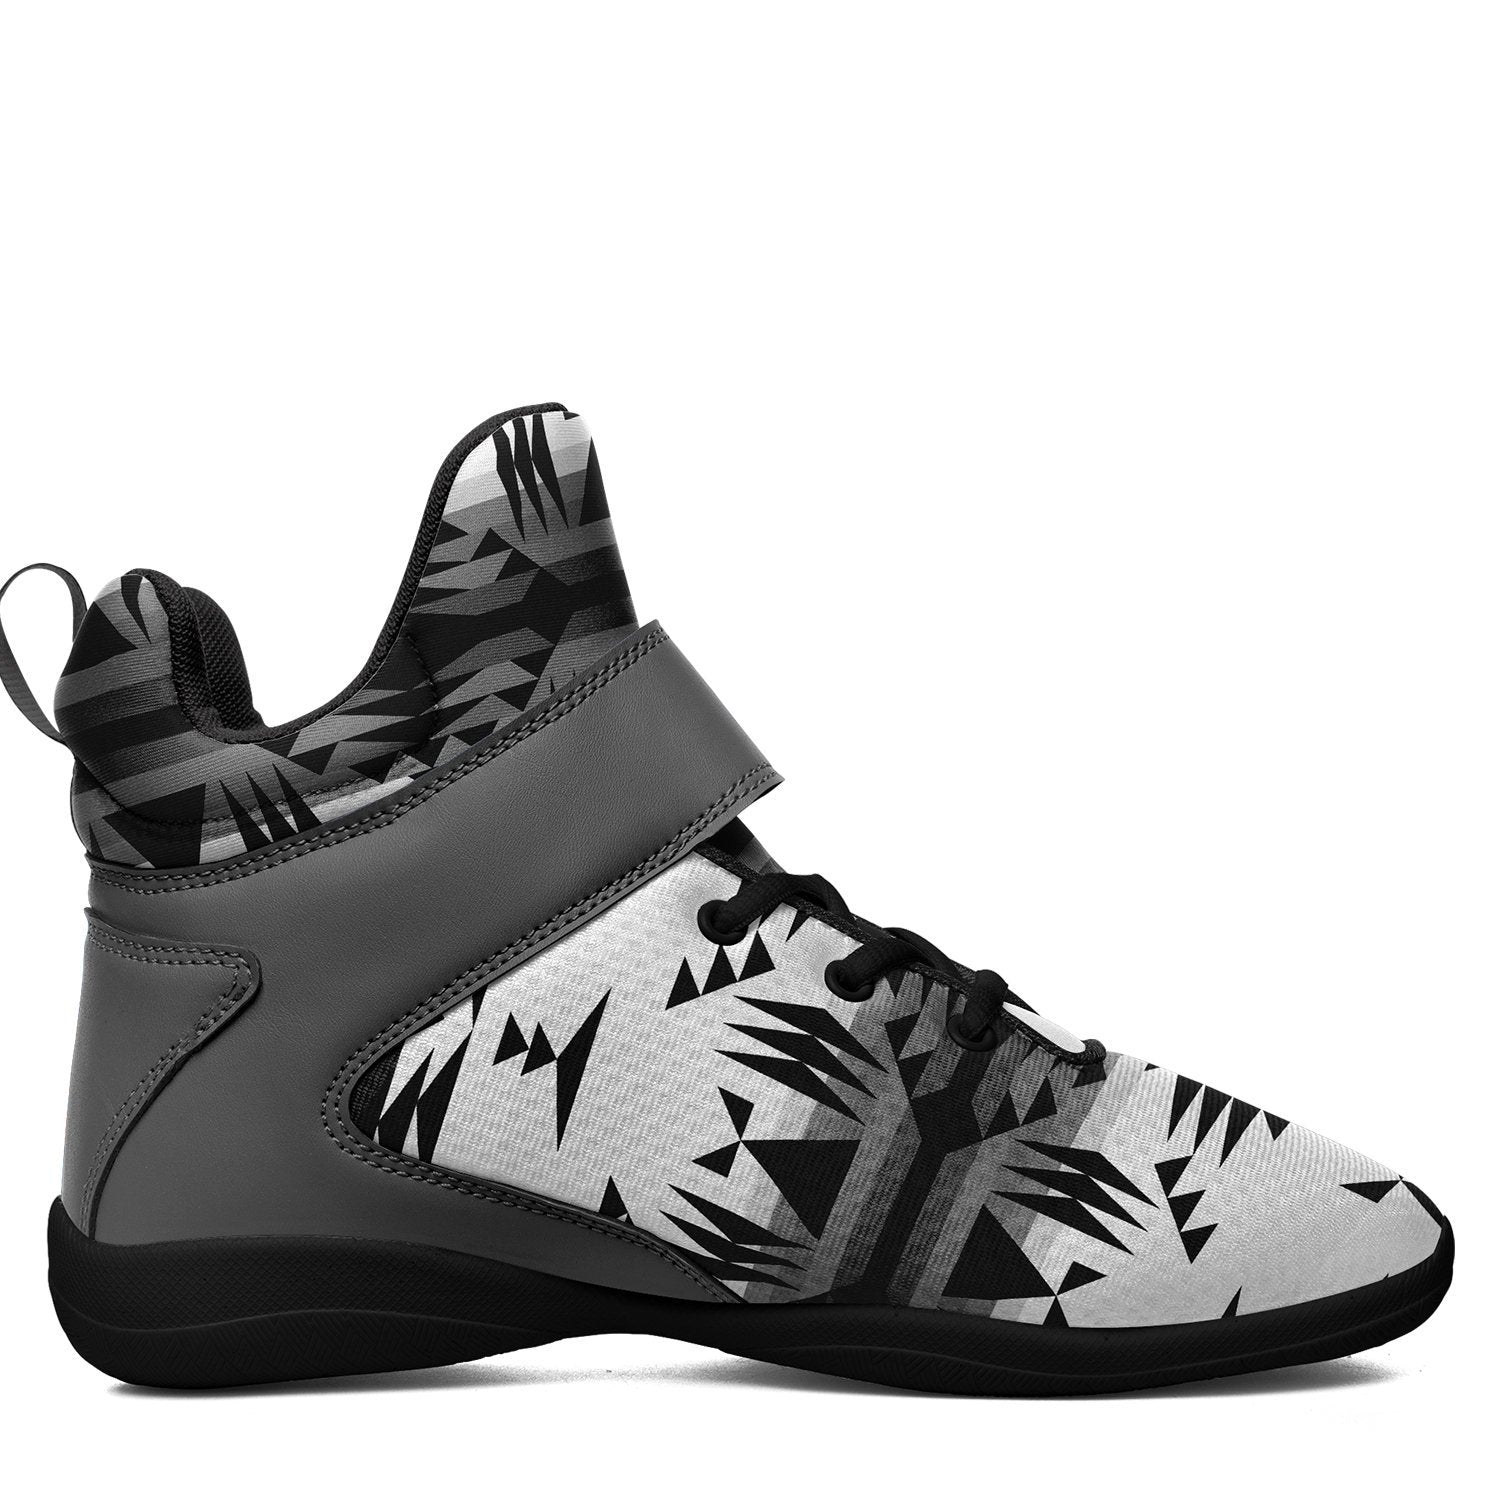 Between the Mountains White and Black Ipottaa Basketball / Sport High Top Shoes - Black Sole 49 Dzine 